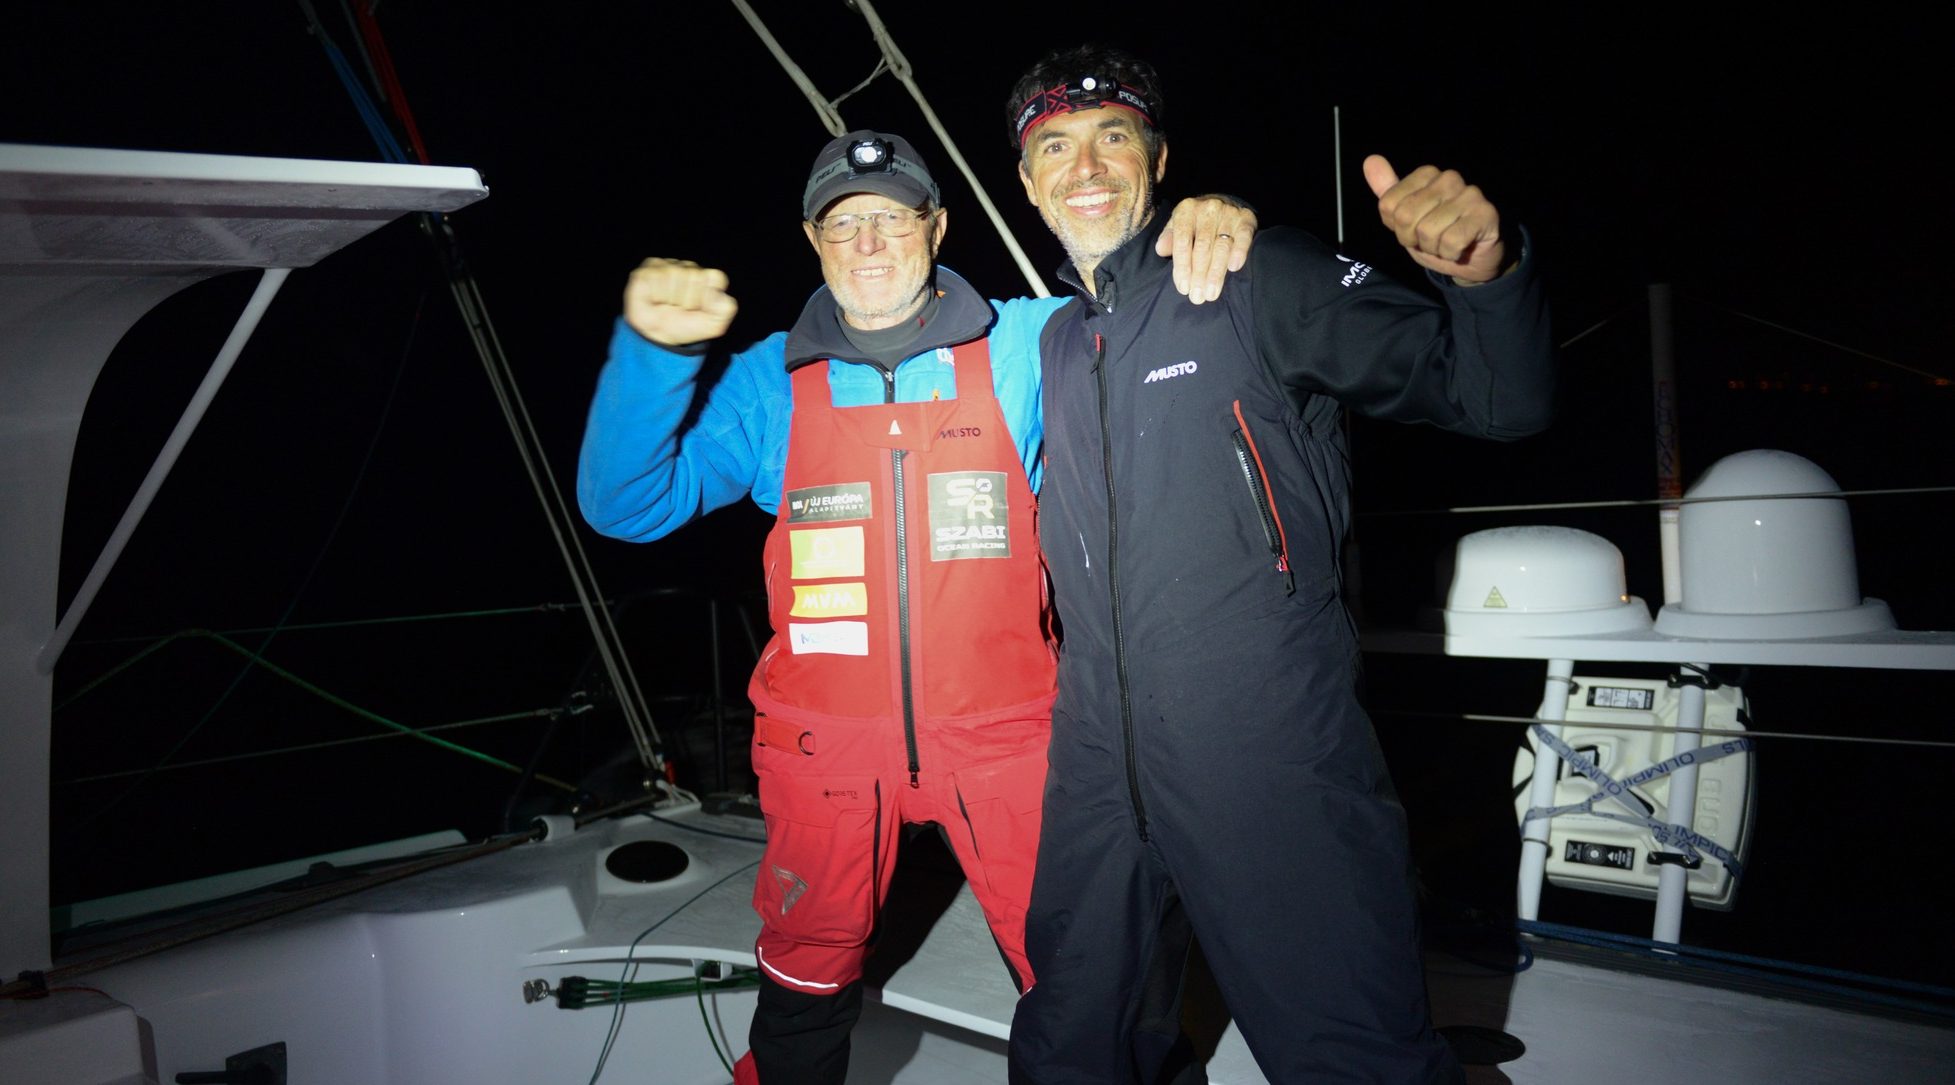 Sailing Legend and His Partner Finish the Rolex Fastnet Race, Fighting Bravely